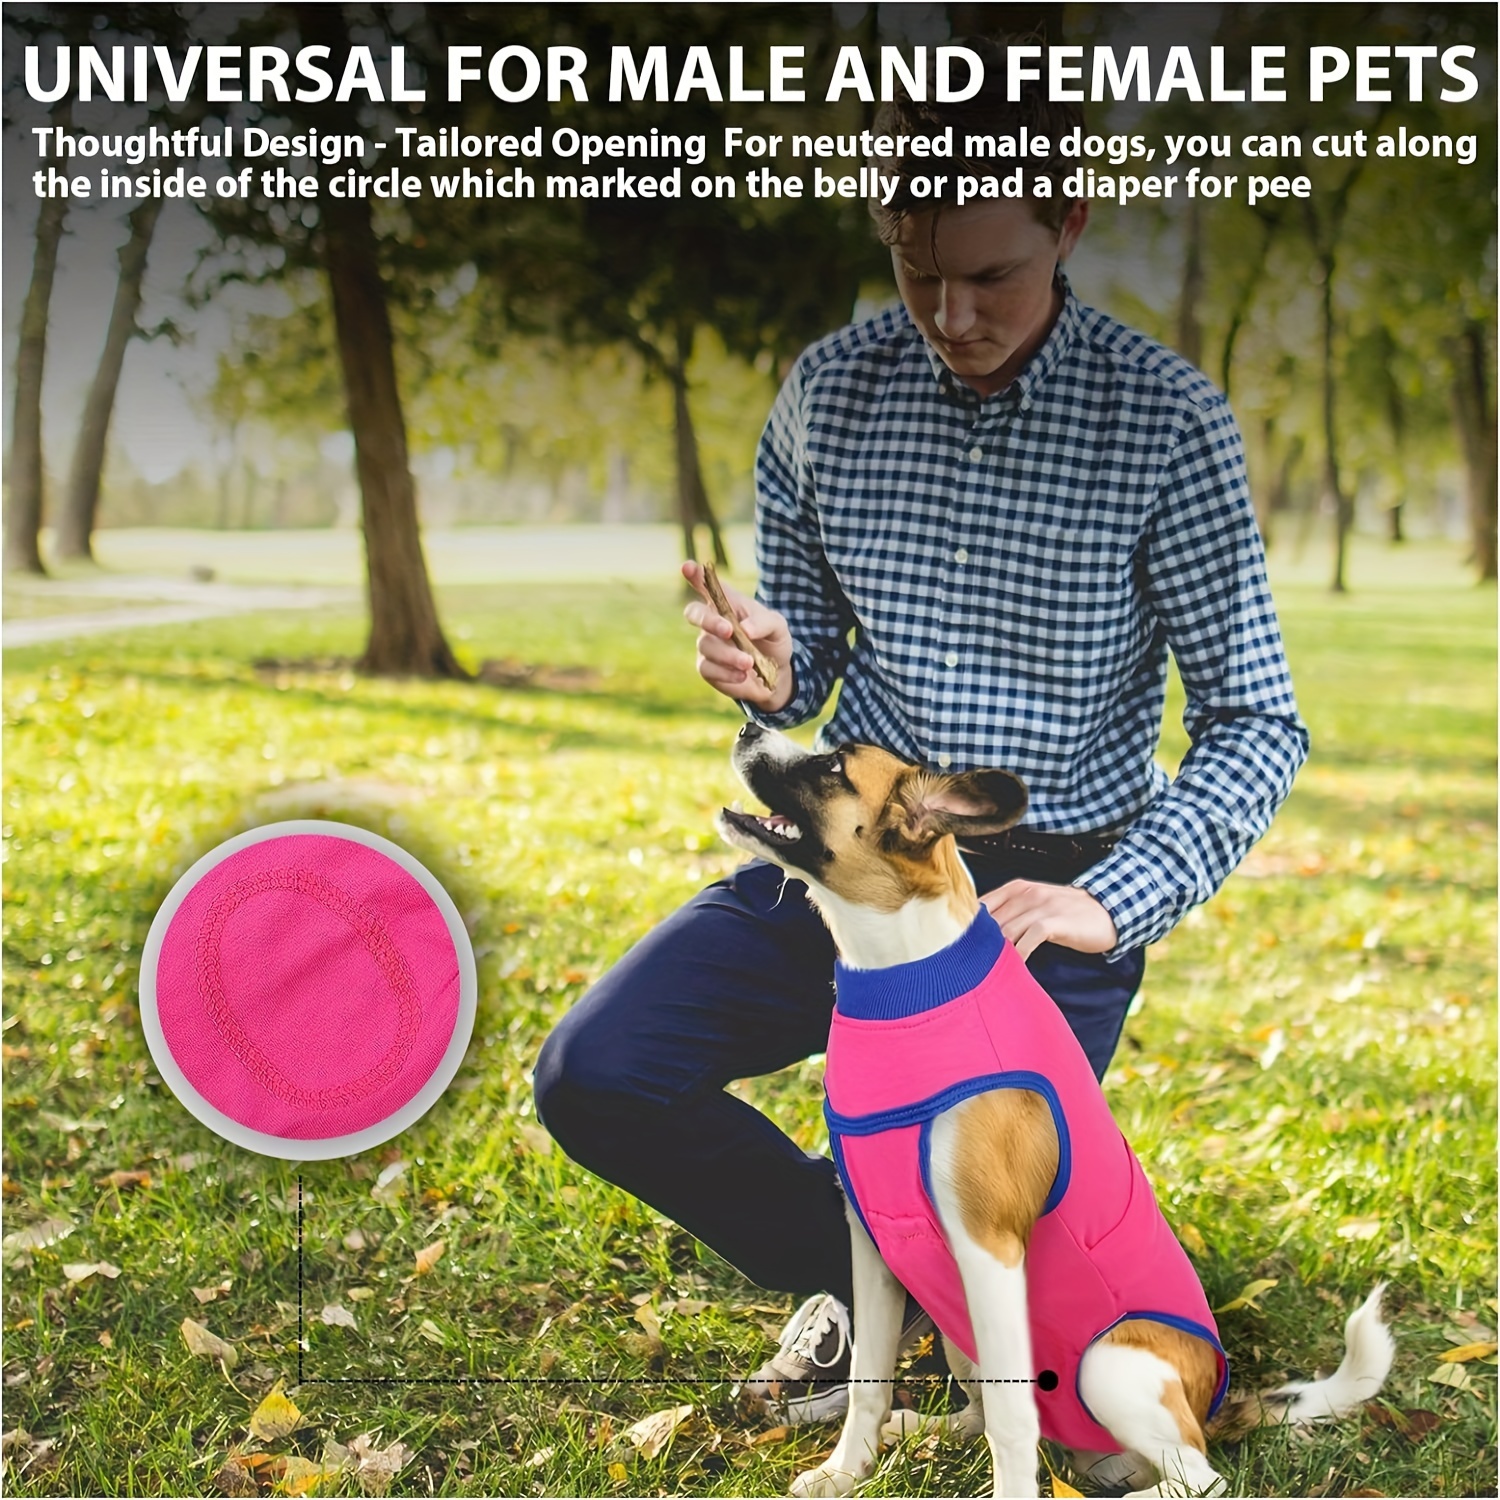 Breathable Recovery Suit For Dogs After Surgery Male And Female